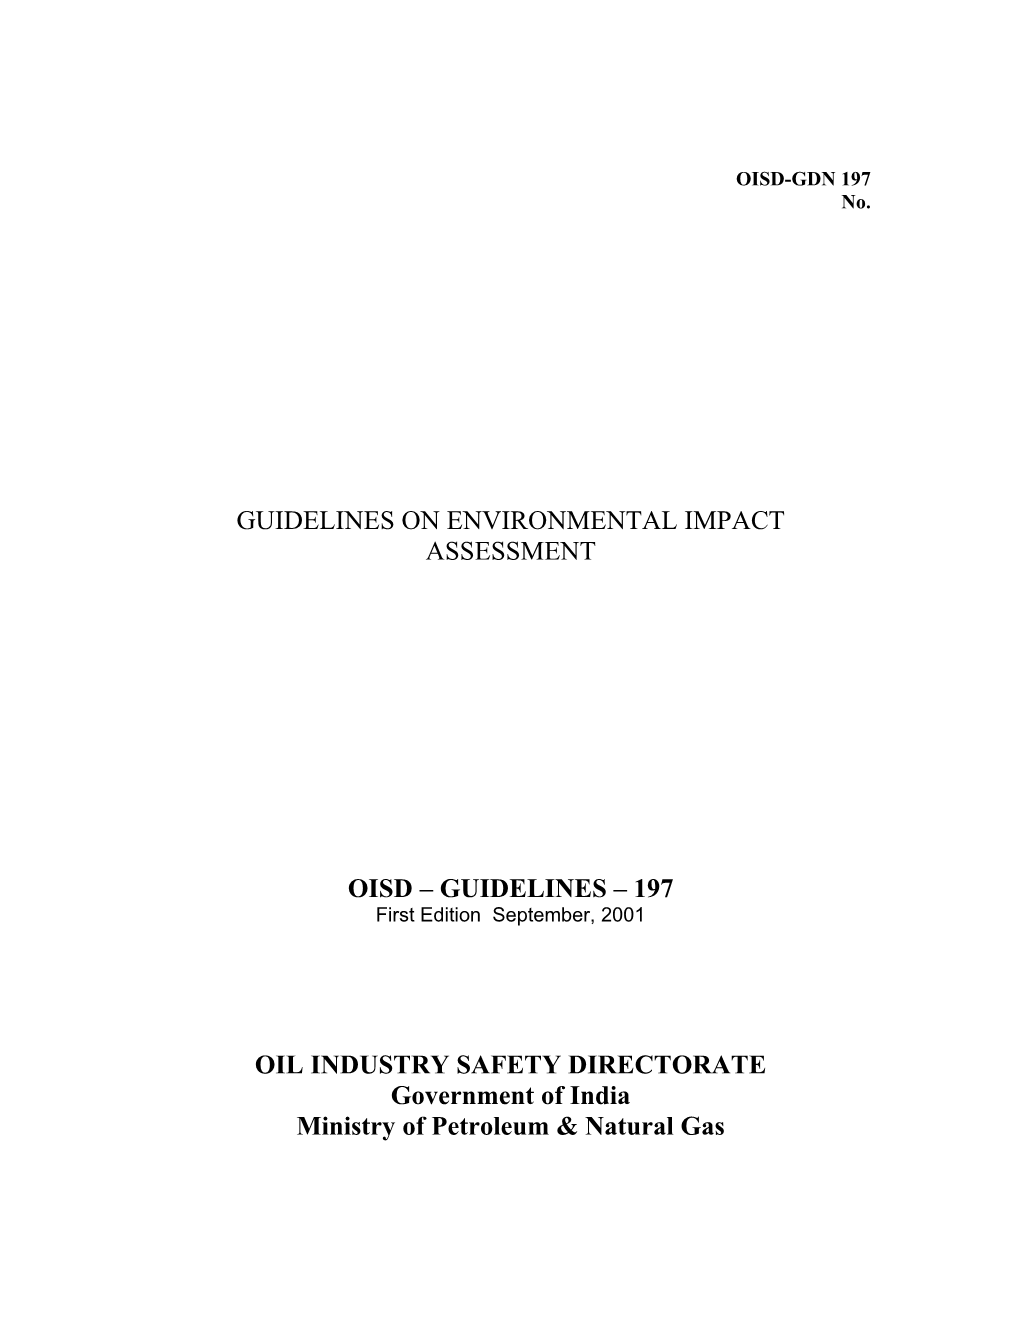 Guidelines on Environmental Impact Assessment